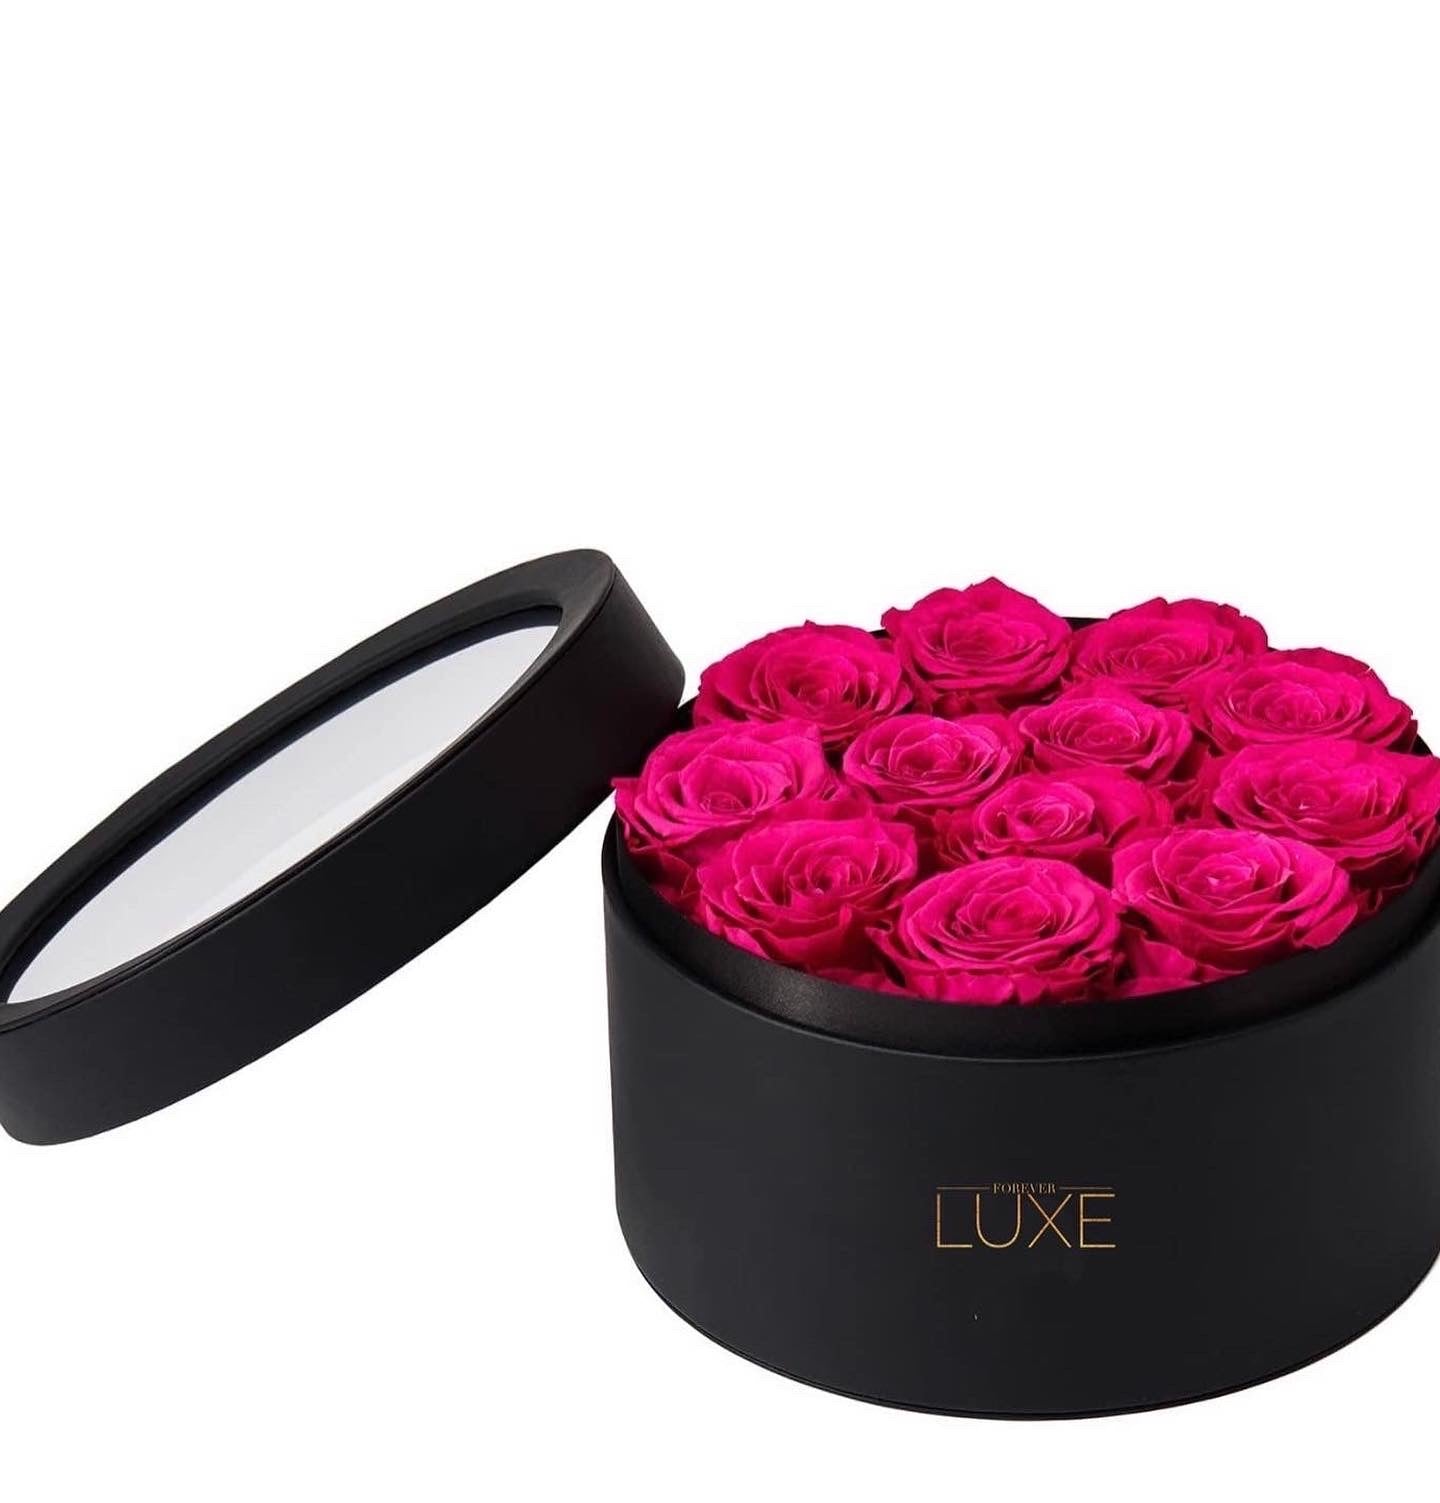 Forever LUXE Roses